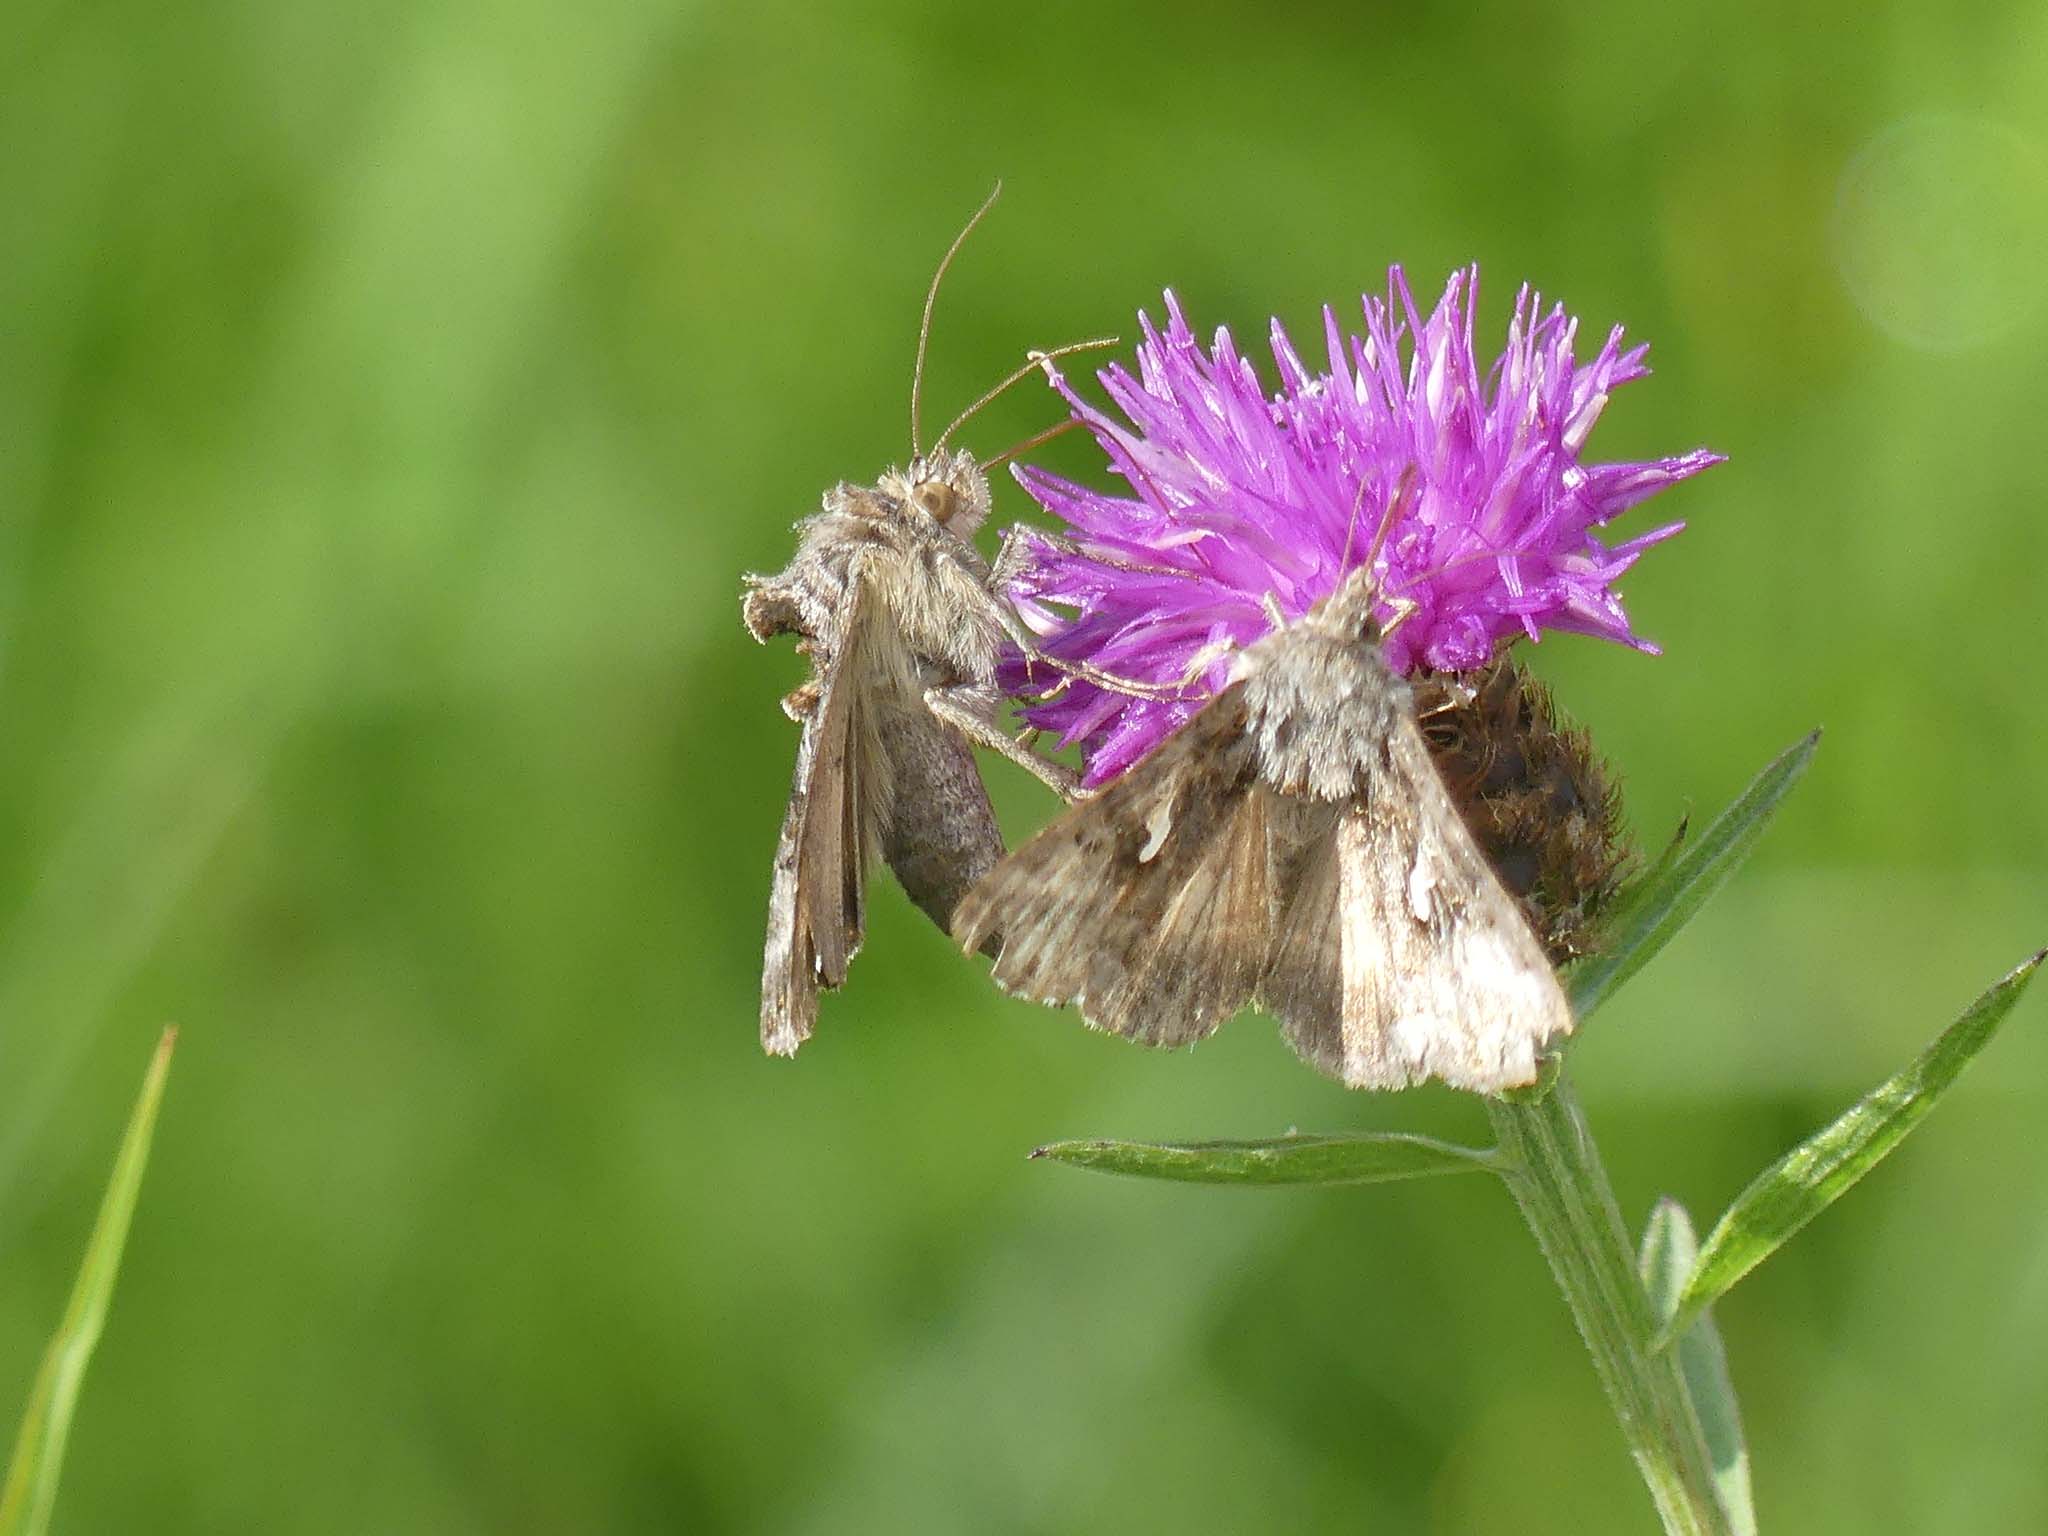 Two moths resting on a pink flower, with a green out-of-focus background